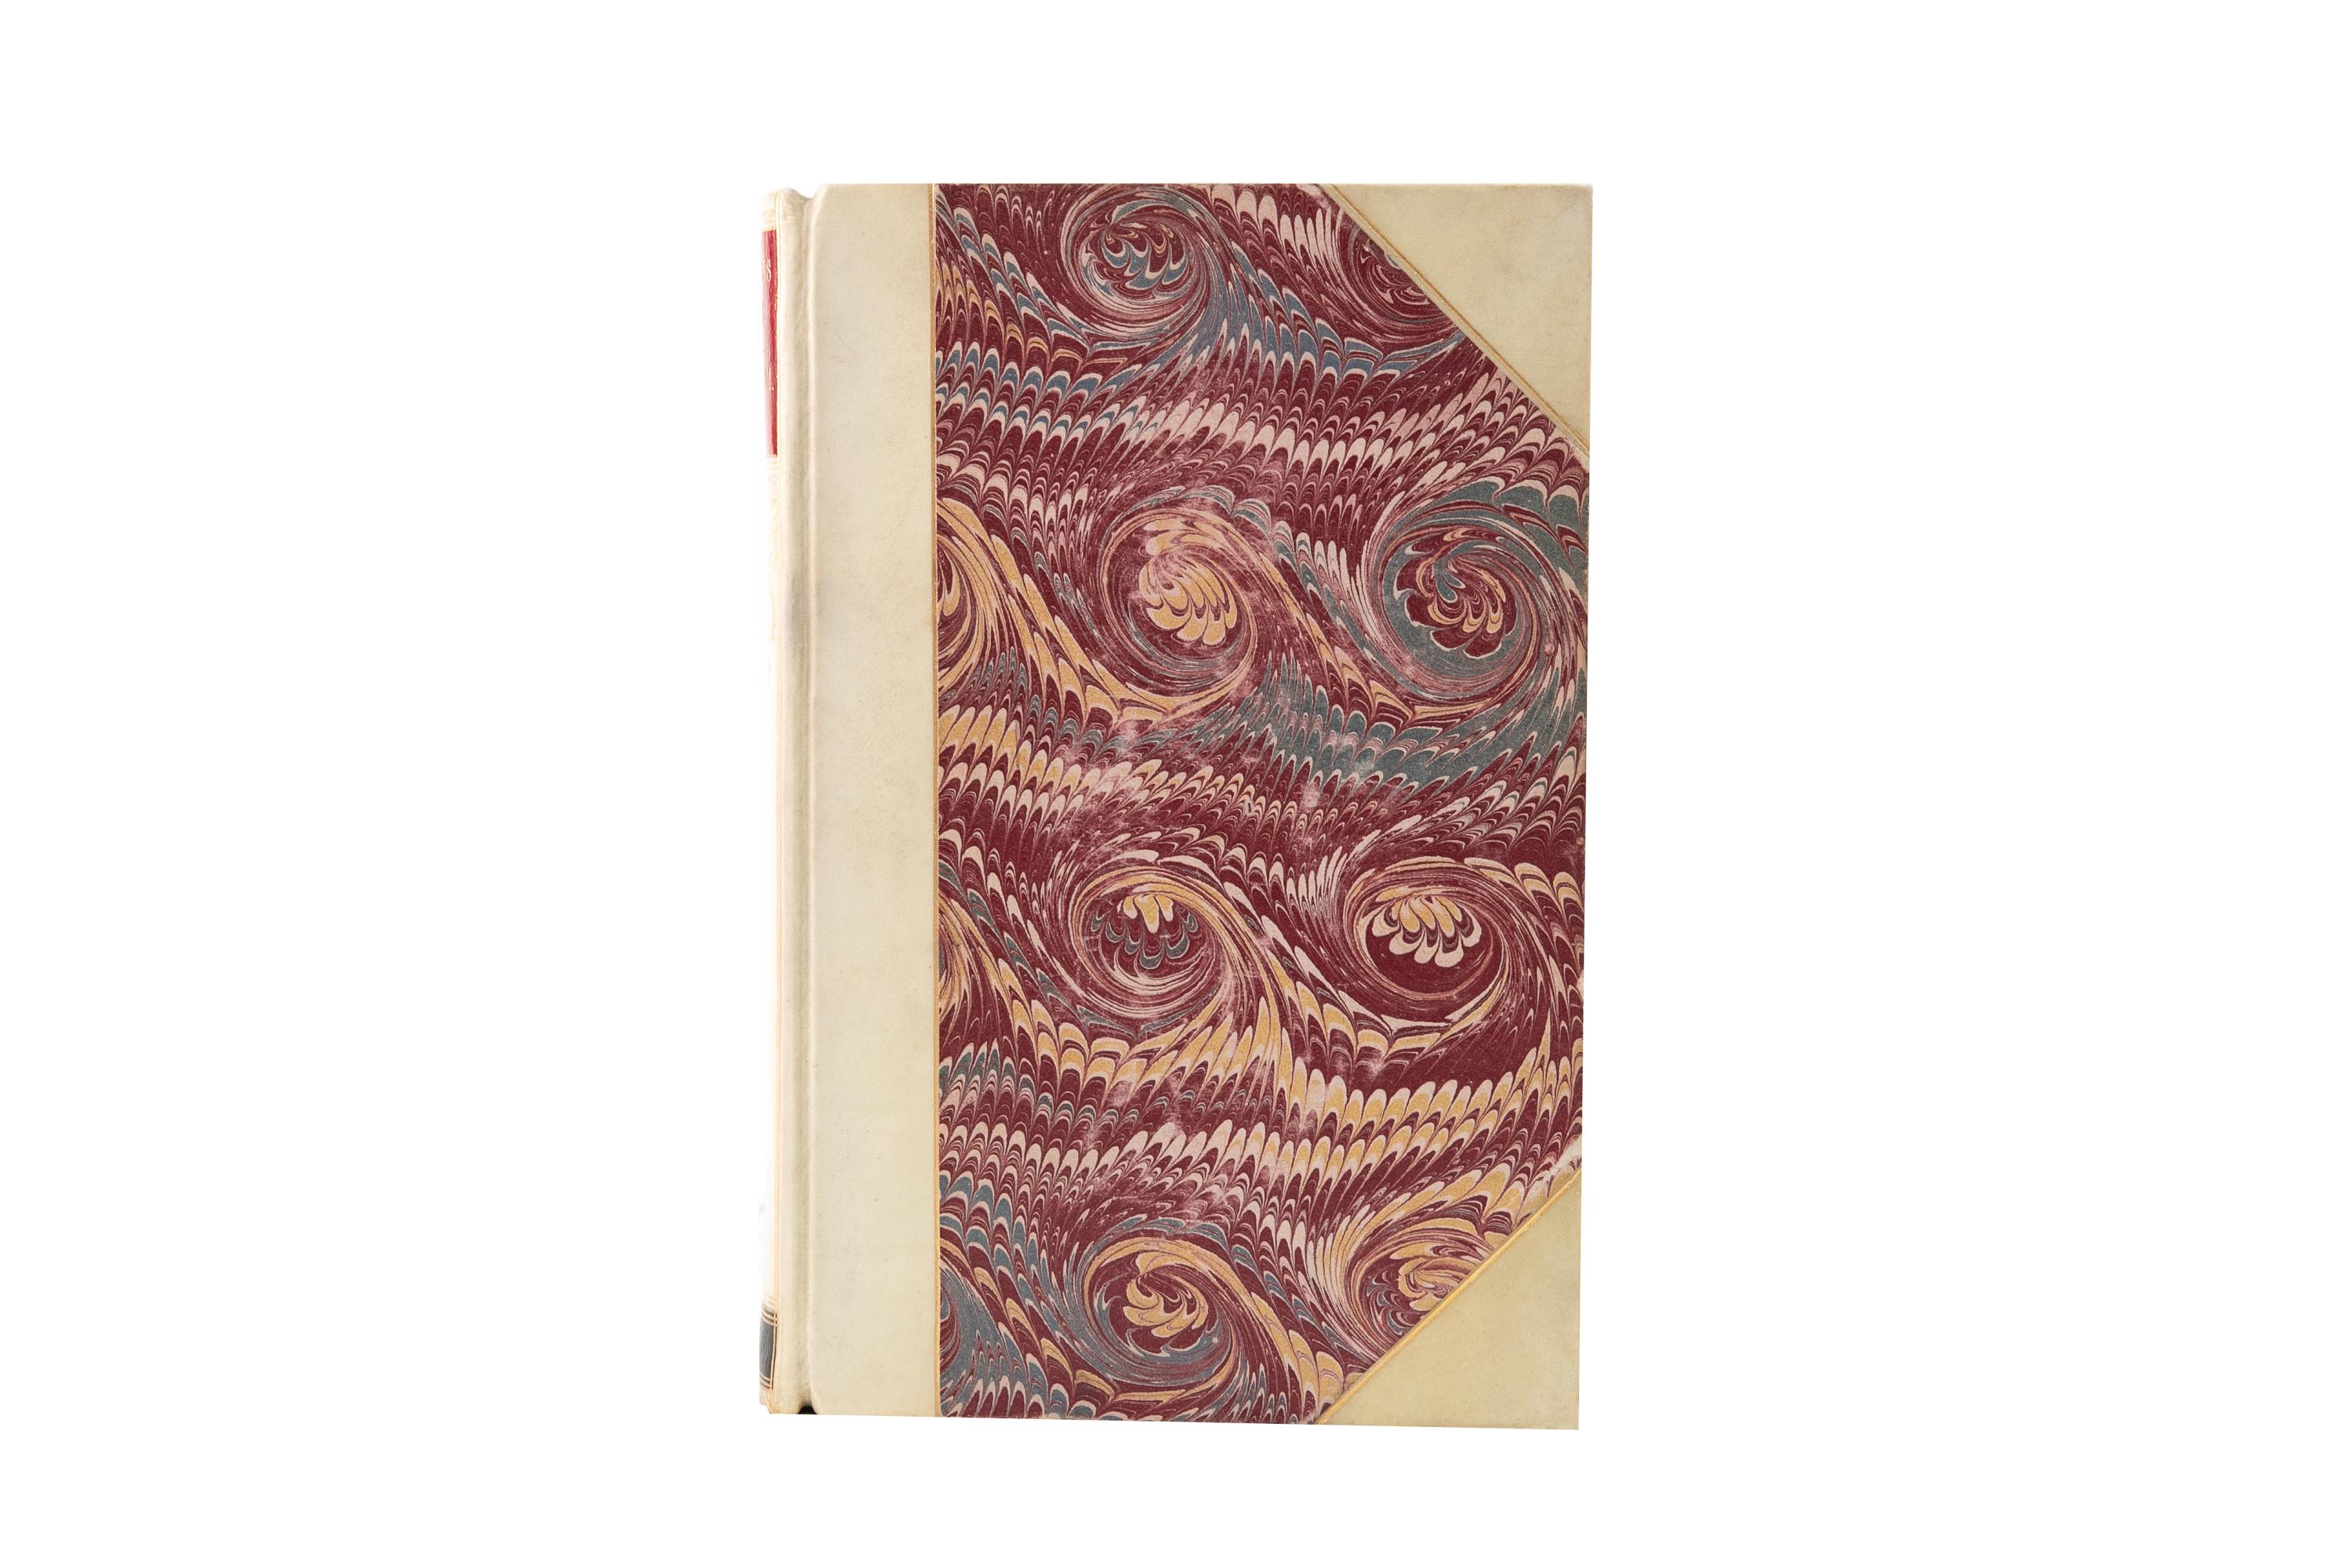 4 Volumes. Oliver Goldsmith, The Works. Edited by
Peter Cunningham. Bound in 3/4 vellum, marbled boards, marbled endpapers, red edges, and gilt spines. Published: London: John Murray 1854